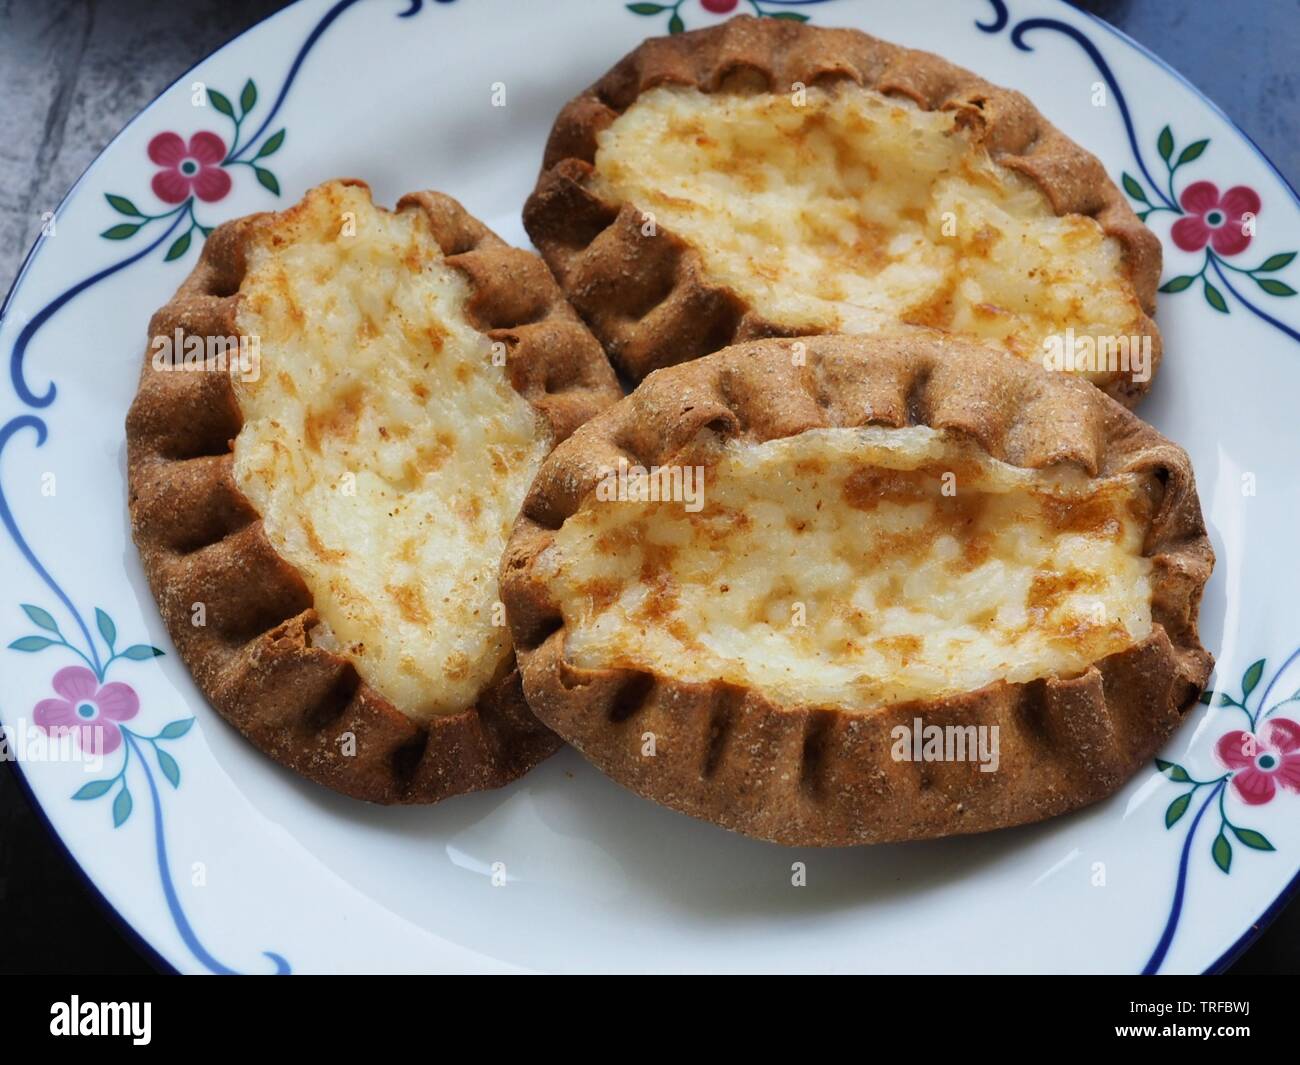 Traditional Finnish Karelian pies on a plate Stock Photo